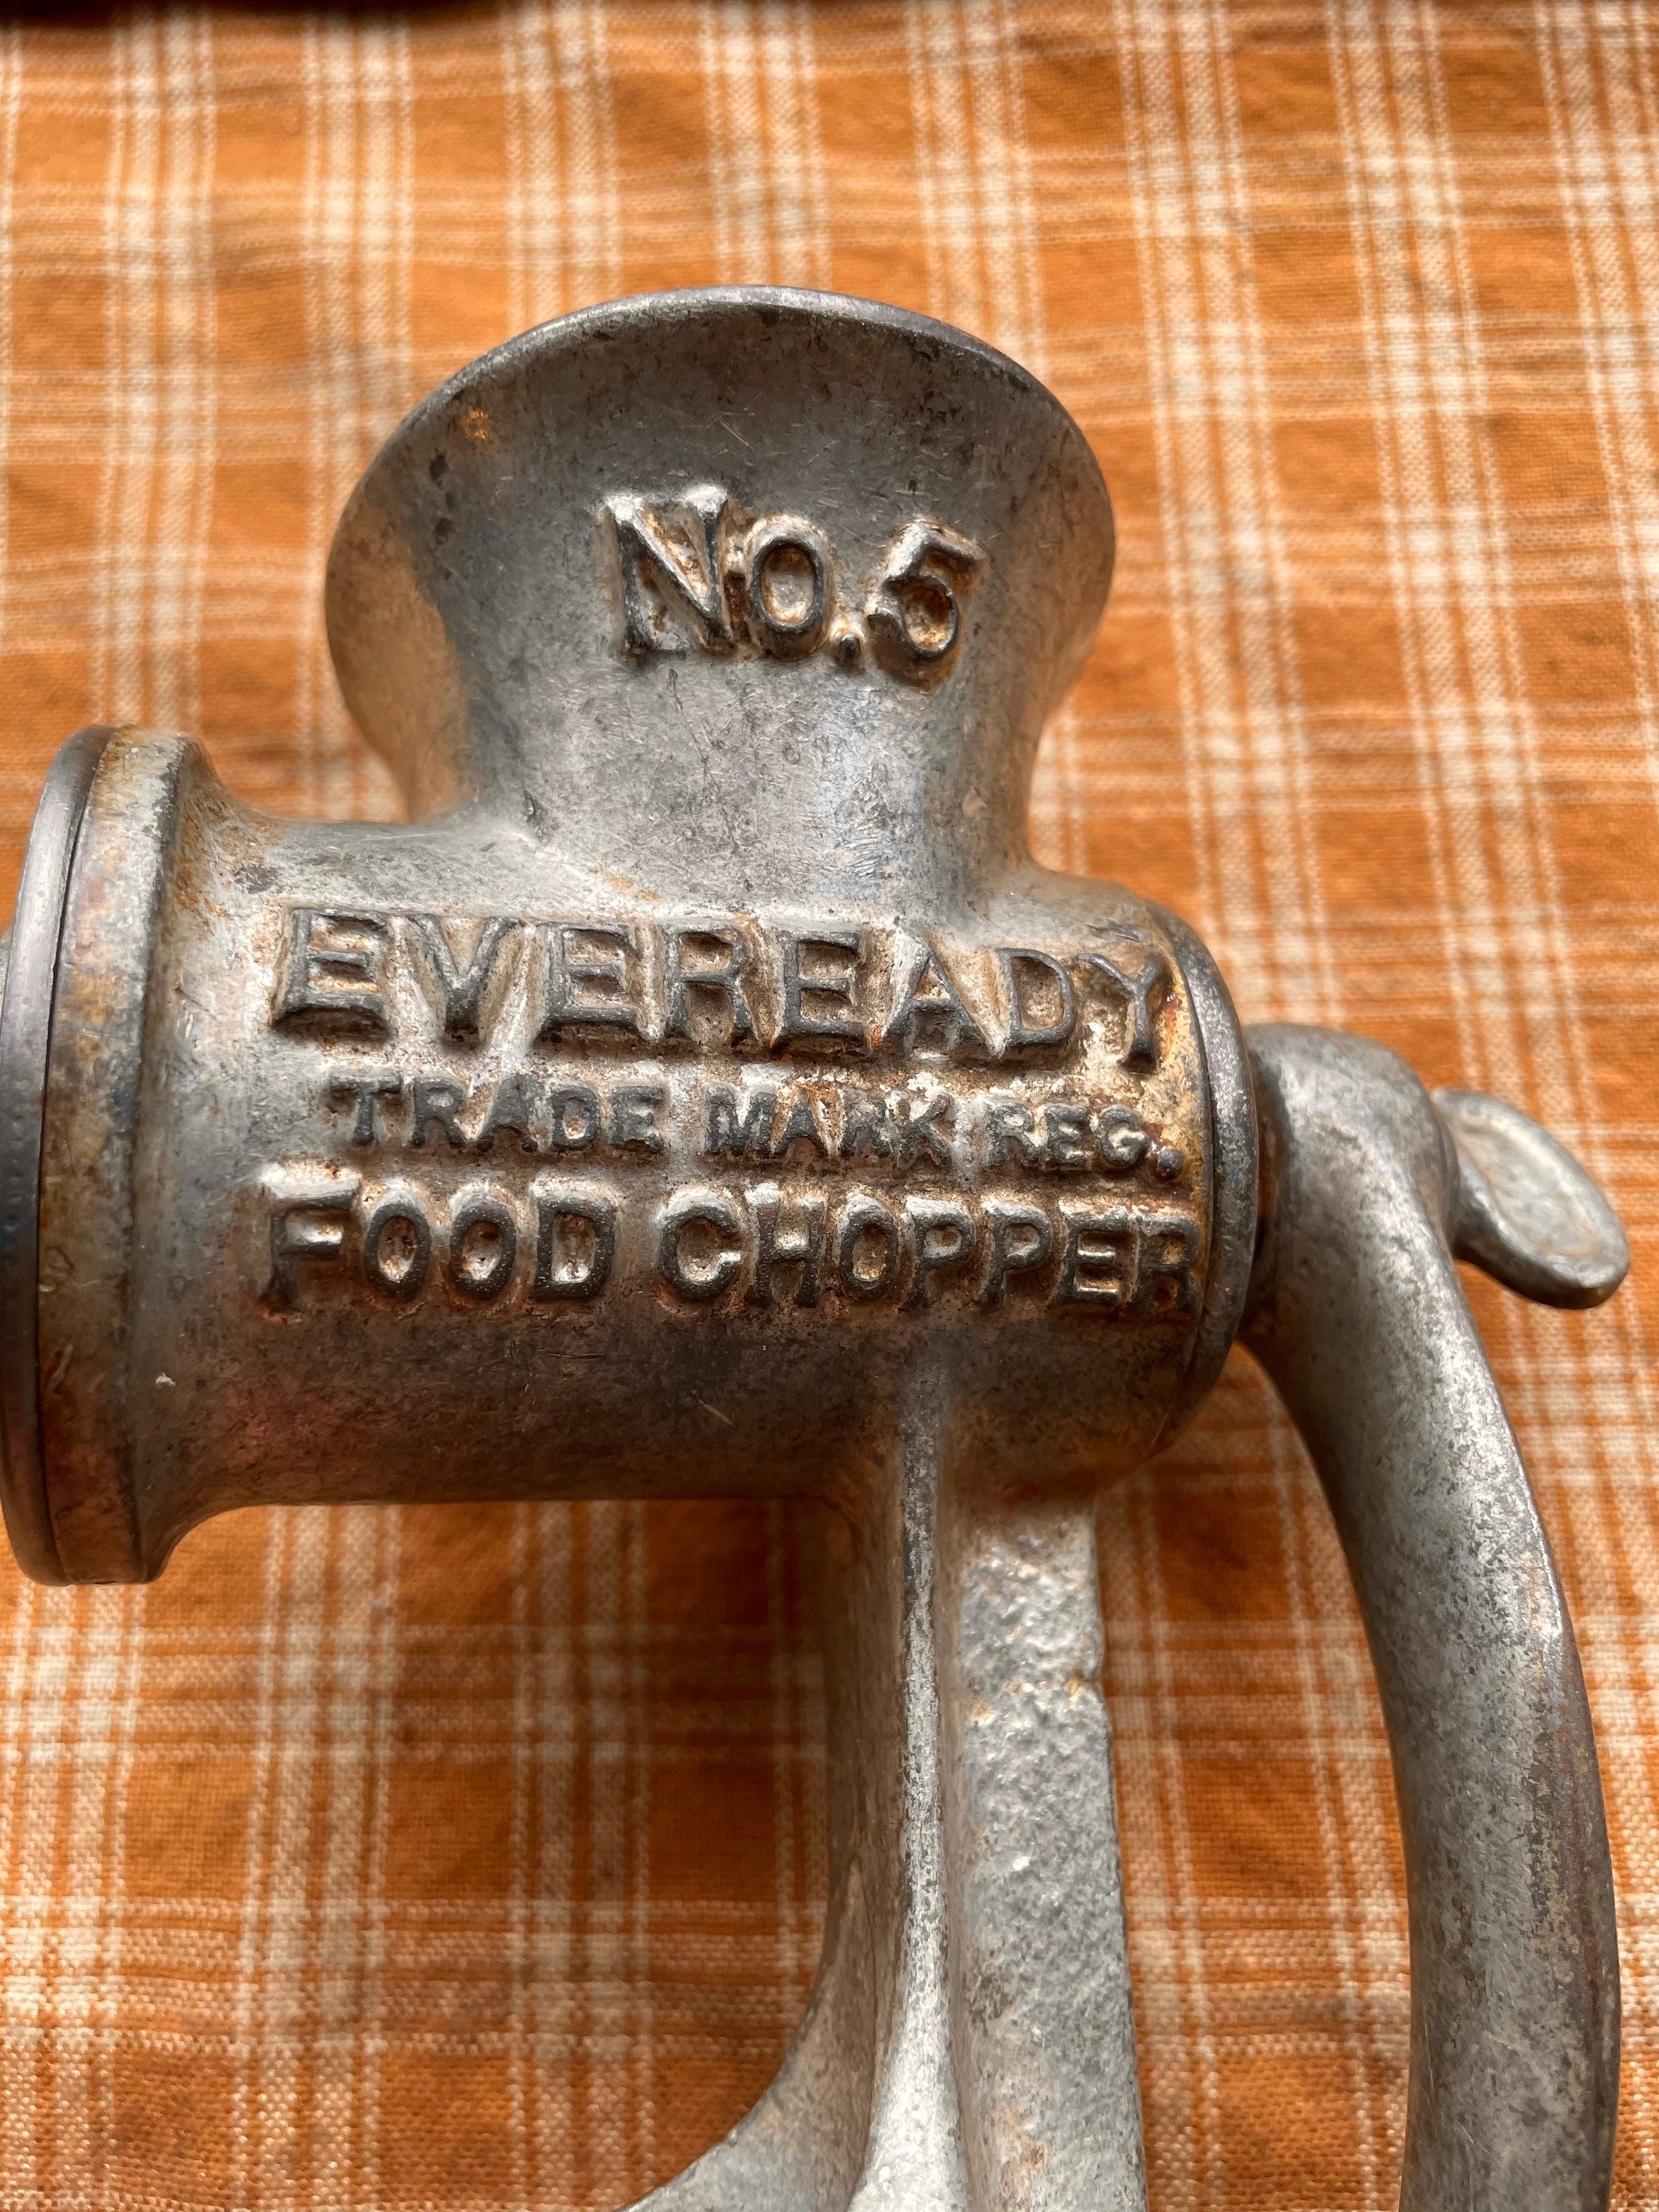 Vintage Eveready Co. Camping Divided Skillet Frederick MD USA GUC